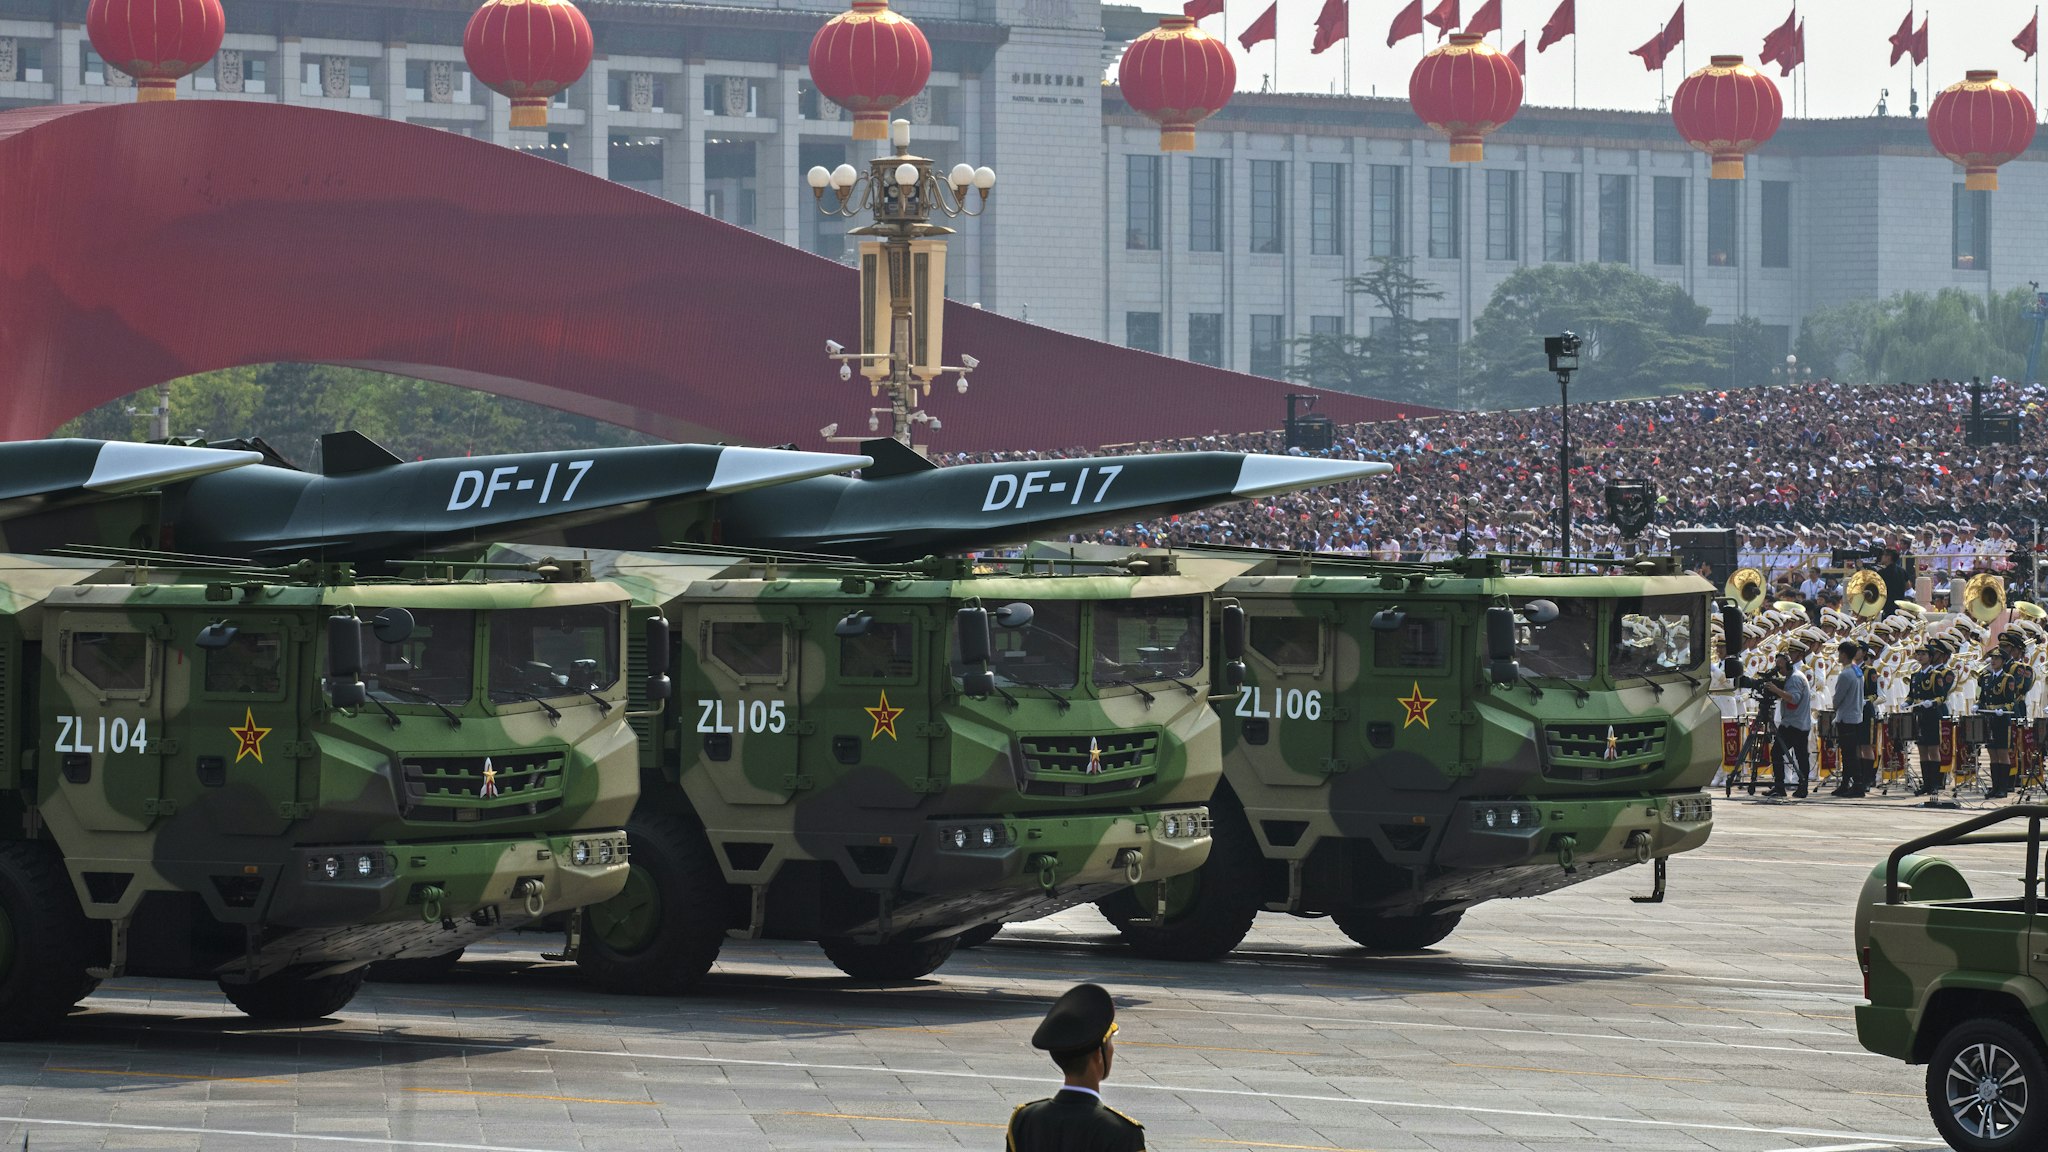 Chinese rocket launchers are seen at a parade to celebrate the 70th Anniversary of the founding of the People's Republic of China in 1949 , at Tiananmen Square on October 1, 2019 in Beijing, China.